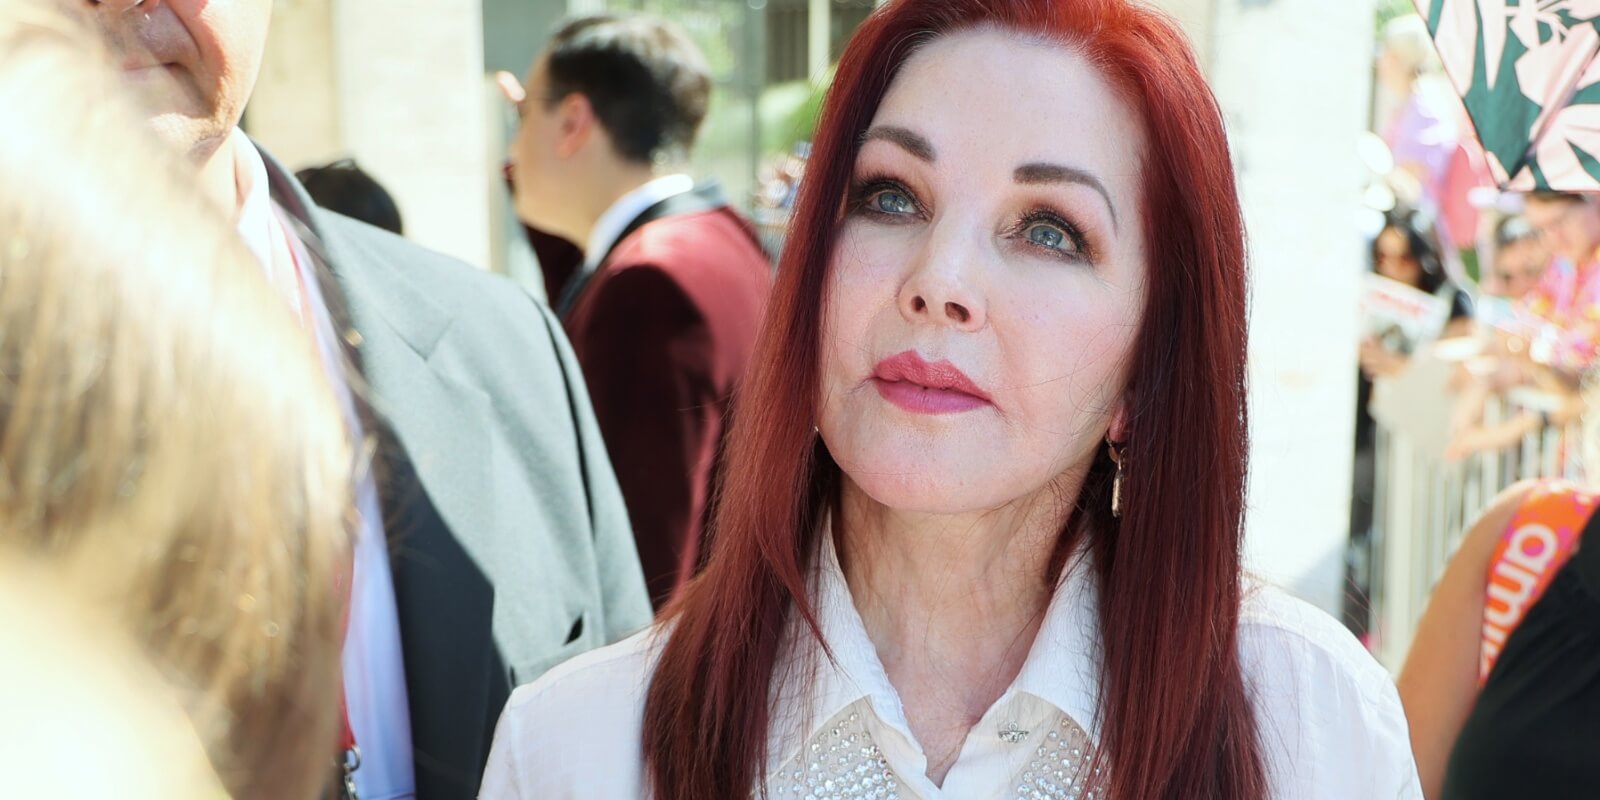 You are currently viewing Priscilla Presley Cried as Audience Exploded Over ‘Priscilla’ at Venice Film Festival